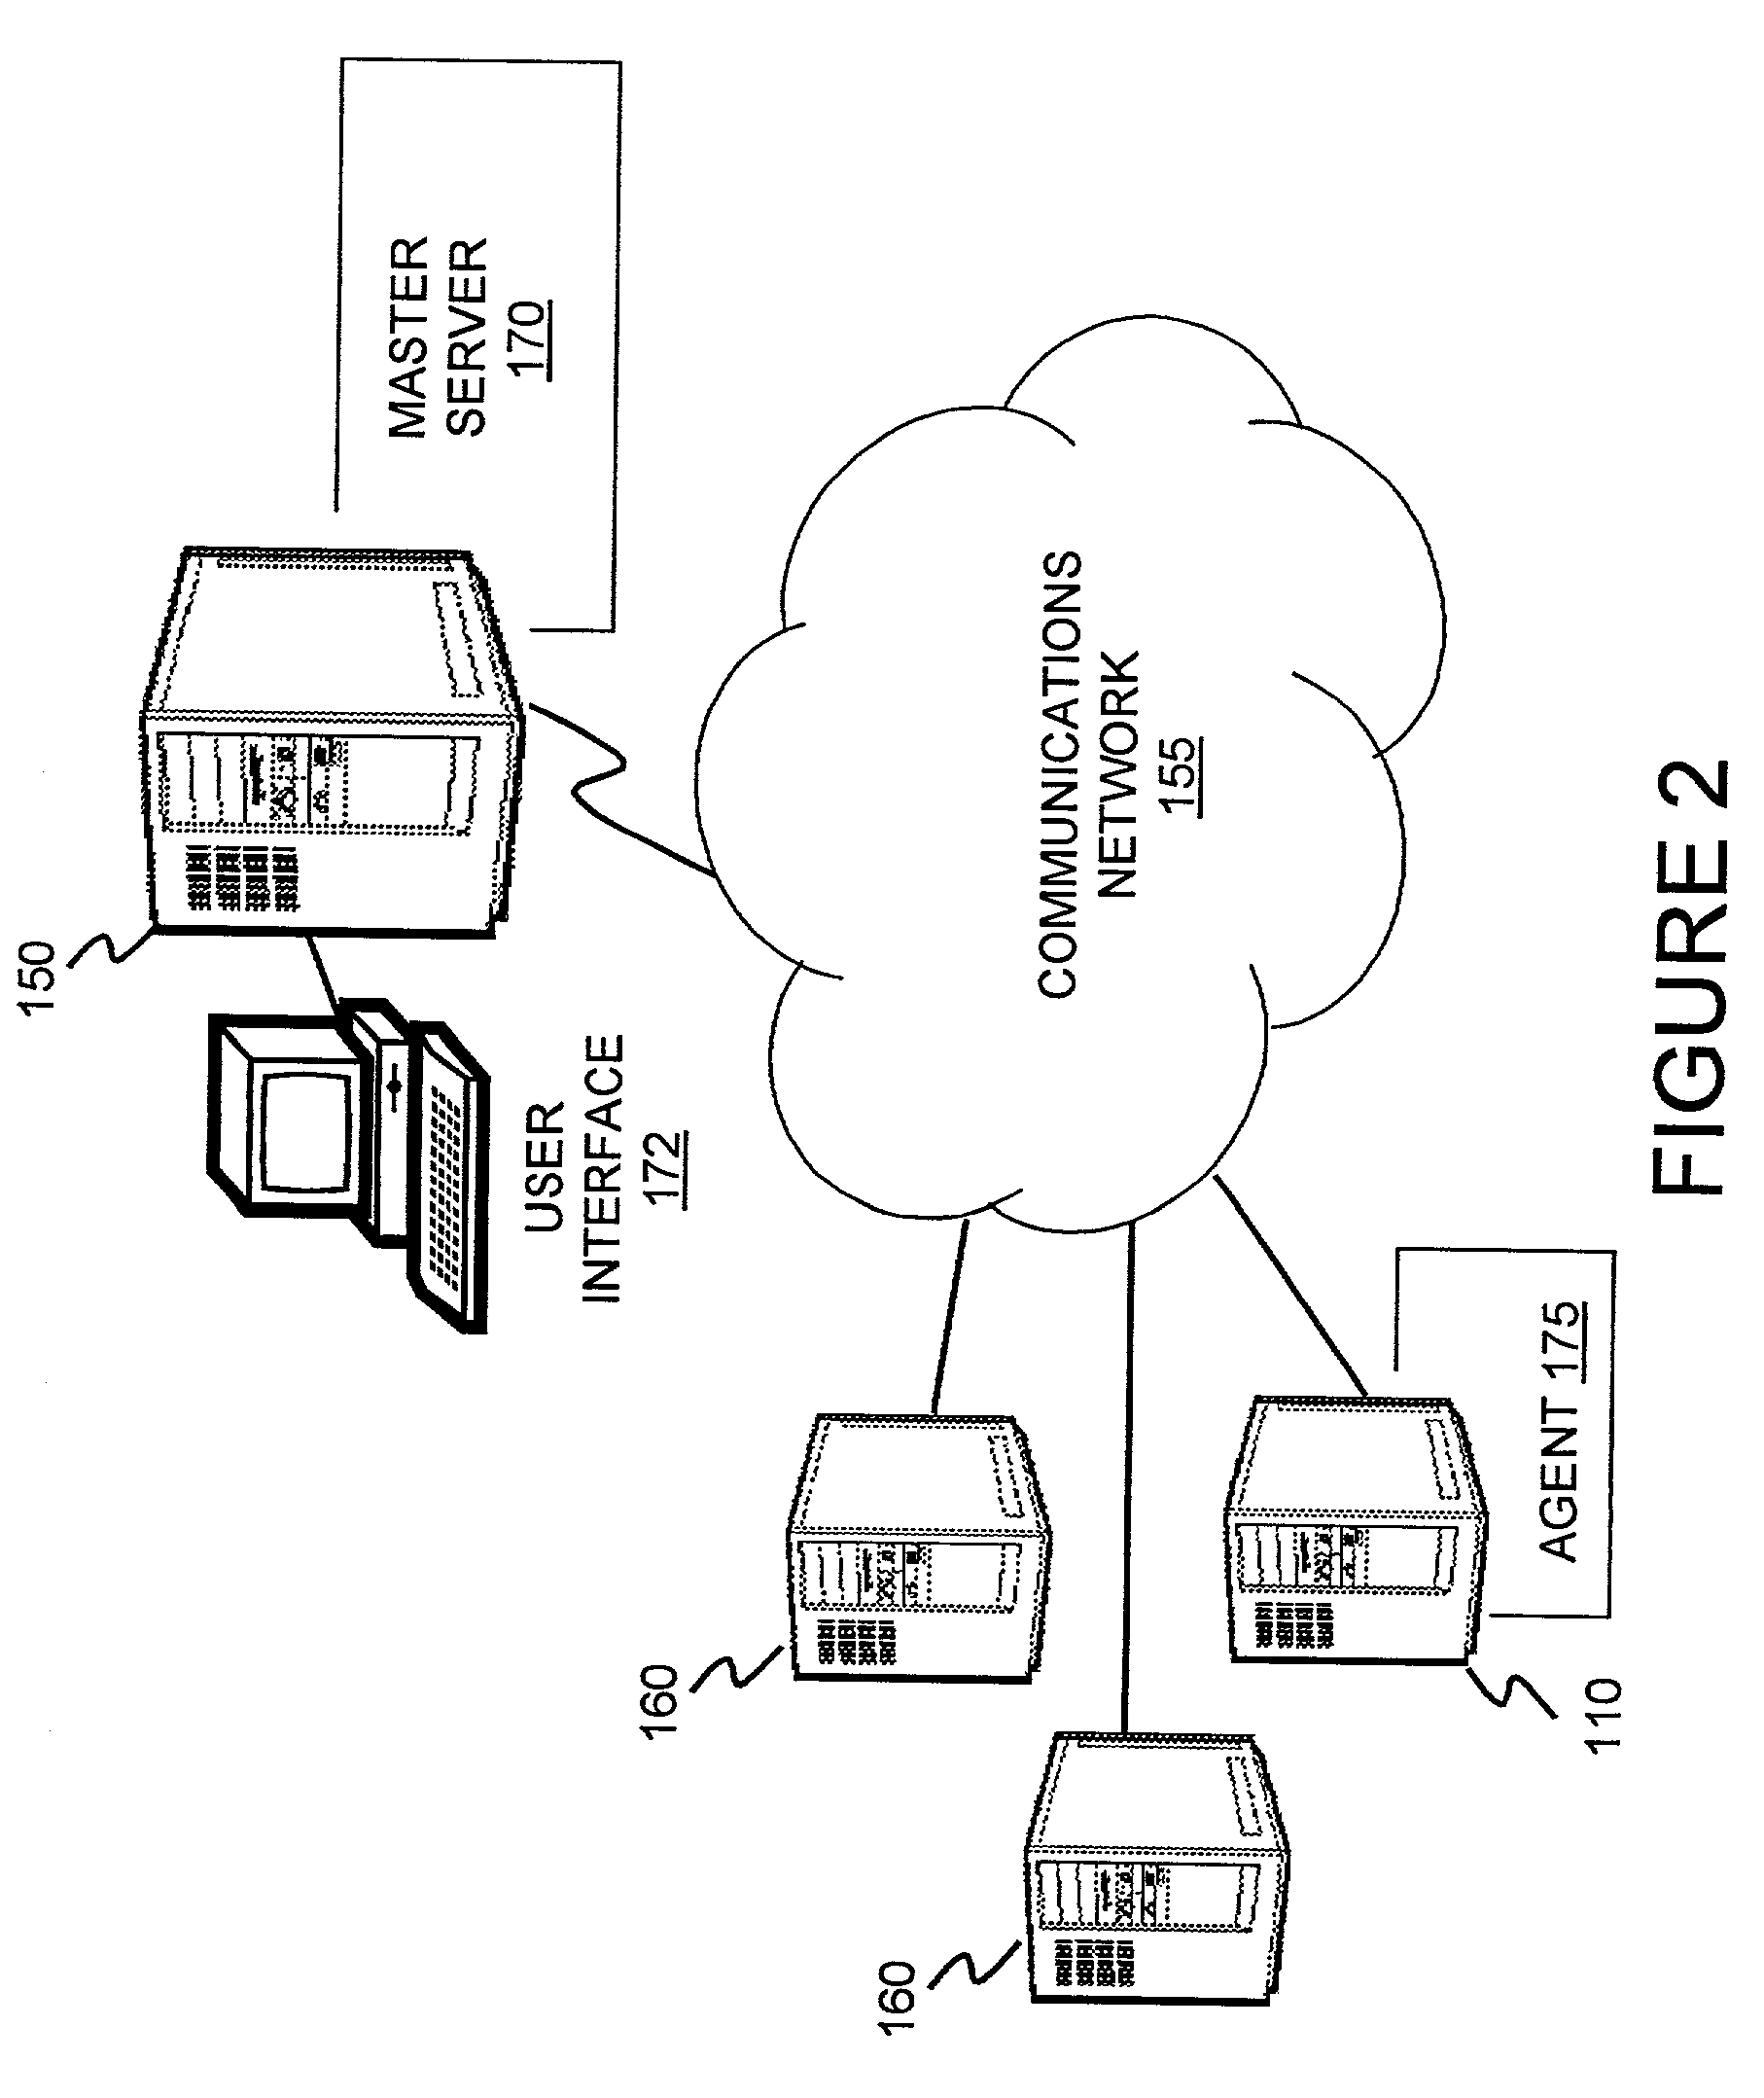 System and method for configurable software provisioning